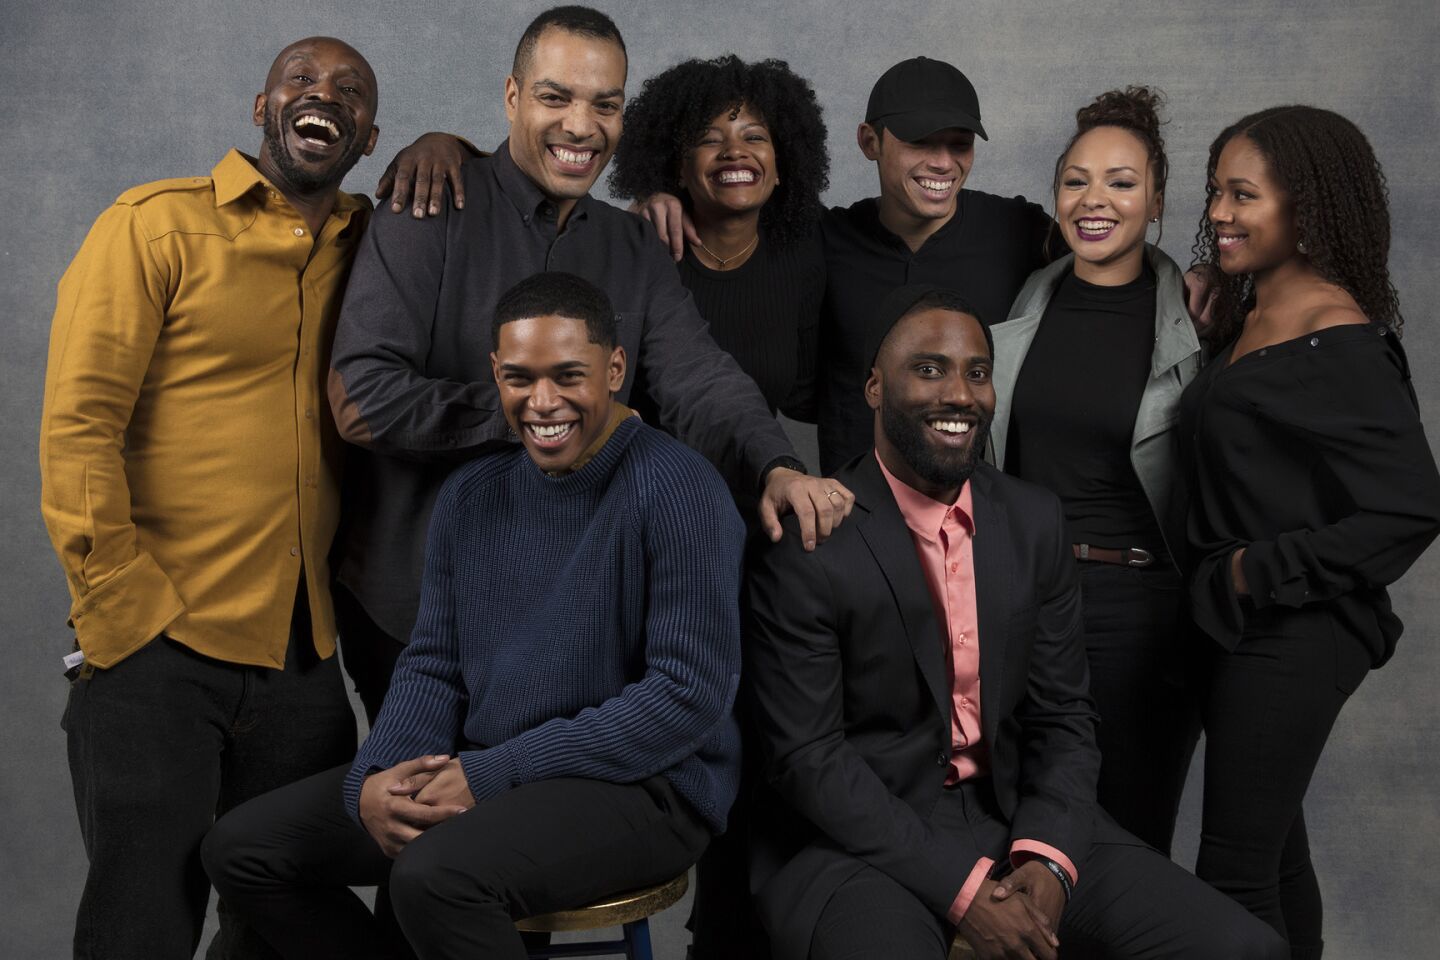 Back, from left, Rob Morgan, director/writer Reinaldo Marcus Green, Chante Adams, Anthony Ramos, Jasmine Cephas Jones, Niclole Beharie, and front, Kelvin Harrison Jr. and John David Washington from the film "Monsters and Men," photographed in the L.A. Times studio in Park City, Utah. FULL COVERAGE: Sundance Film Festival 2018 »